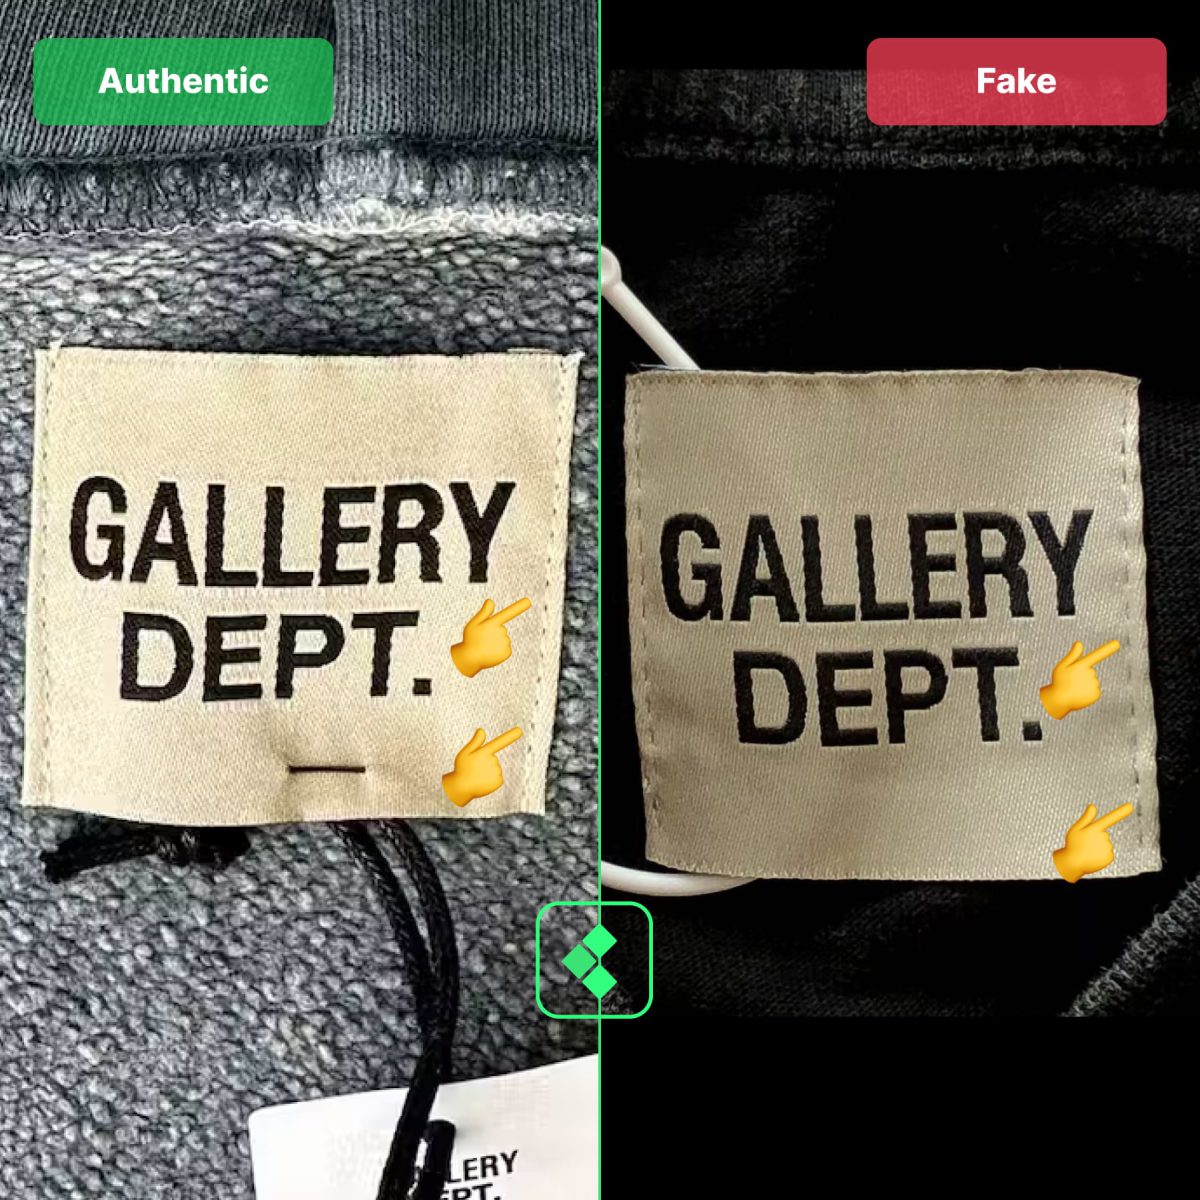 Gallery Dept Fake Vs Real Neck Tag